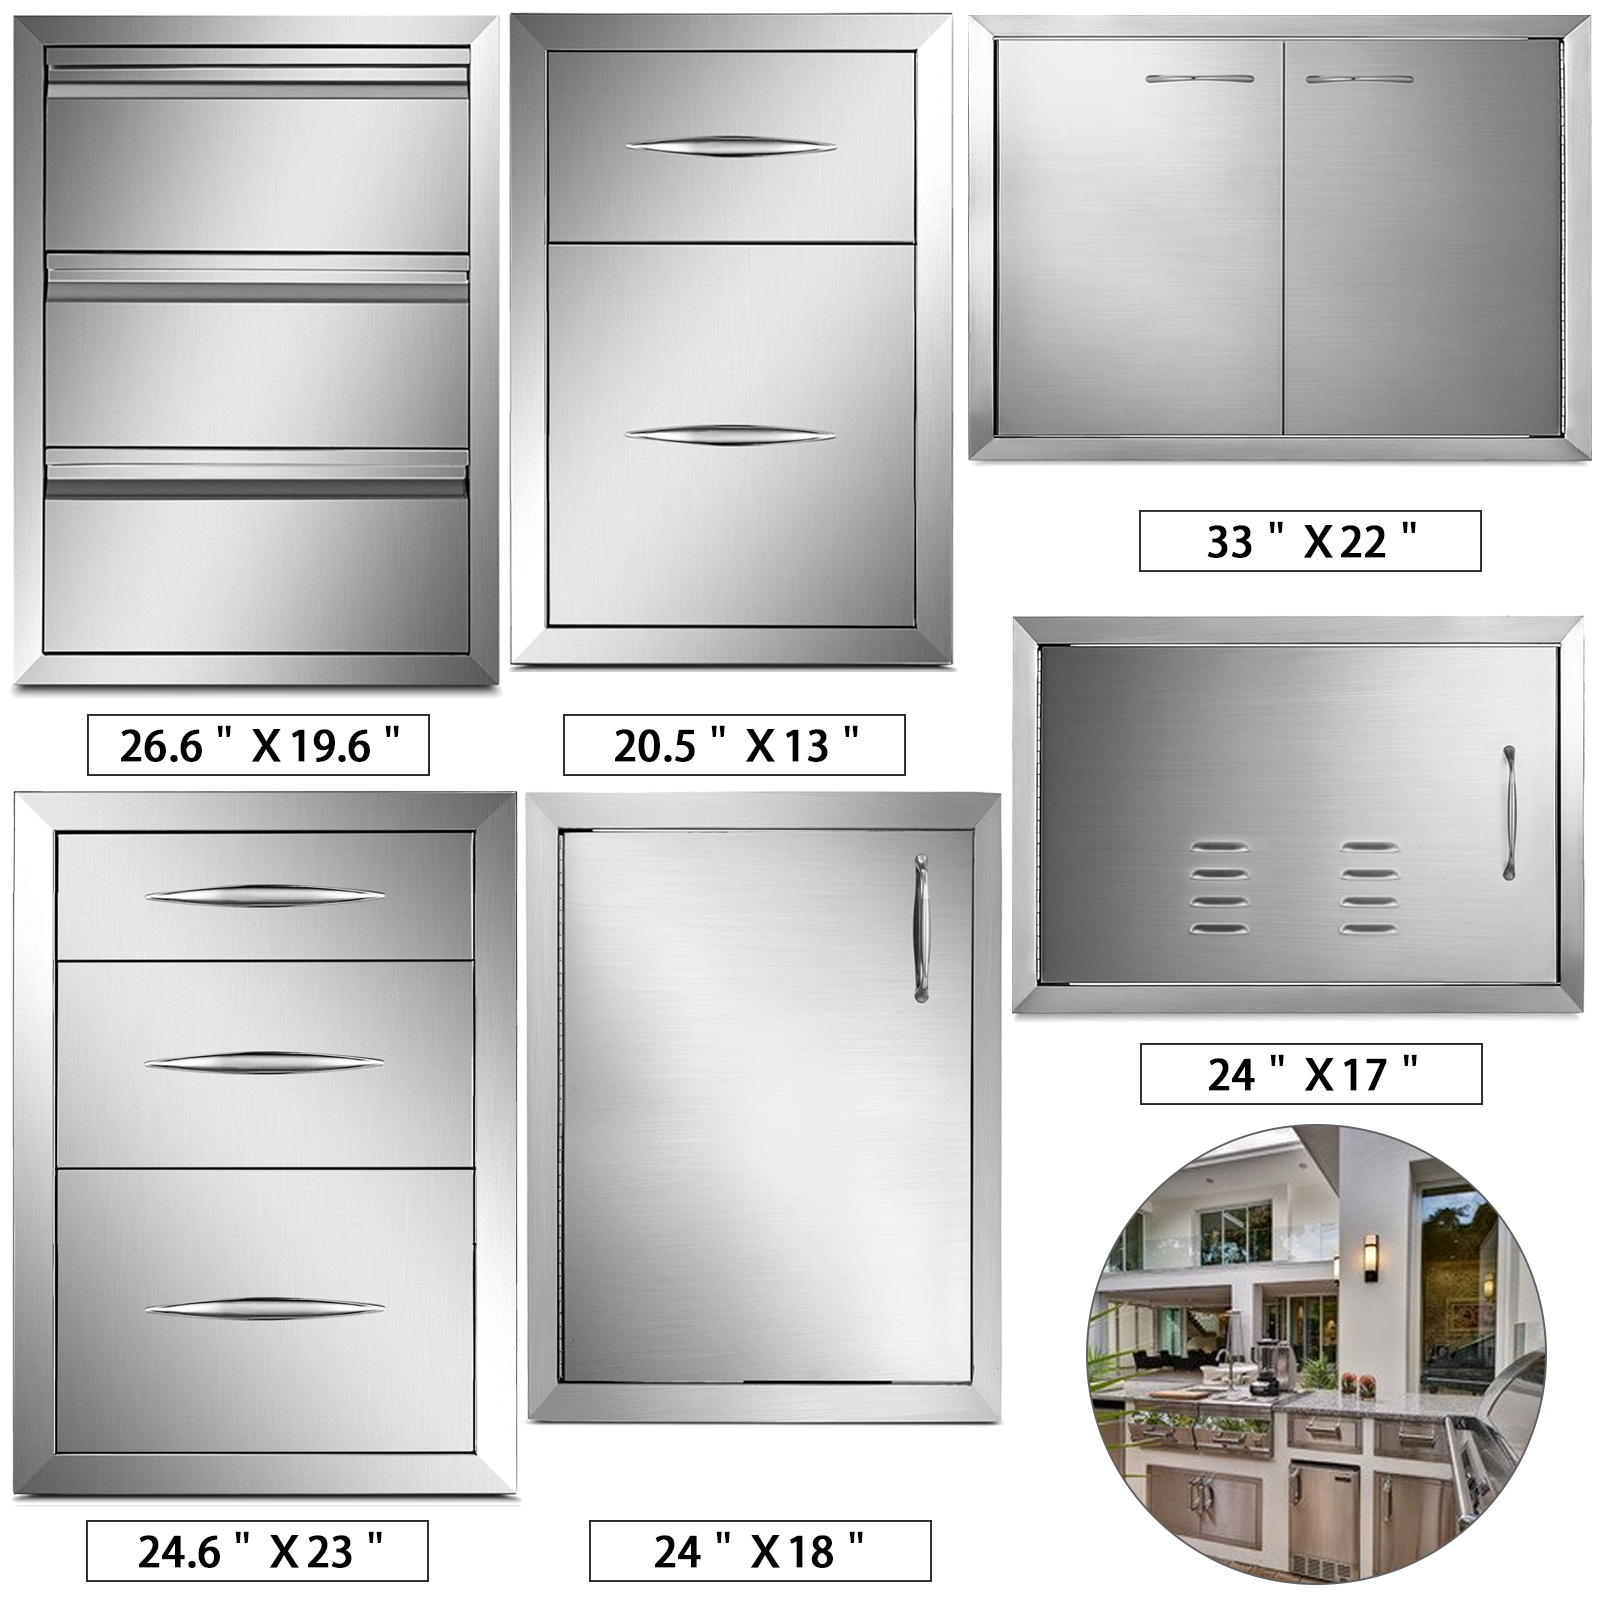 access door, chest of drawers, for outdoor kitchen BBQ